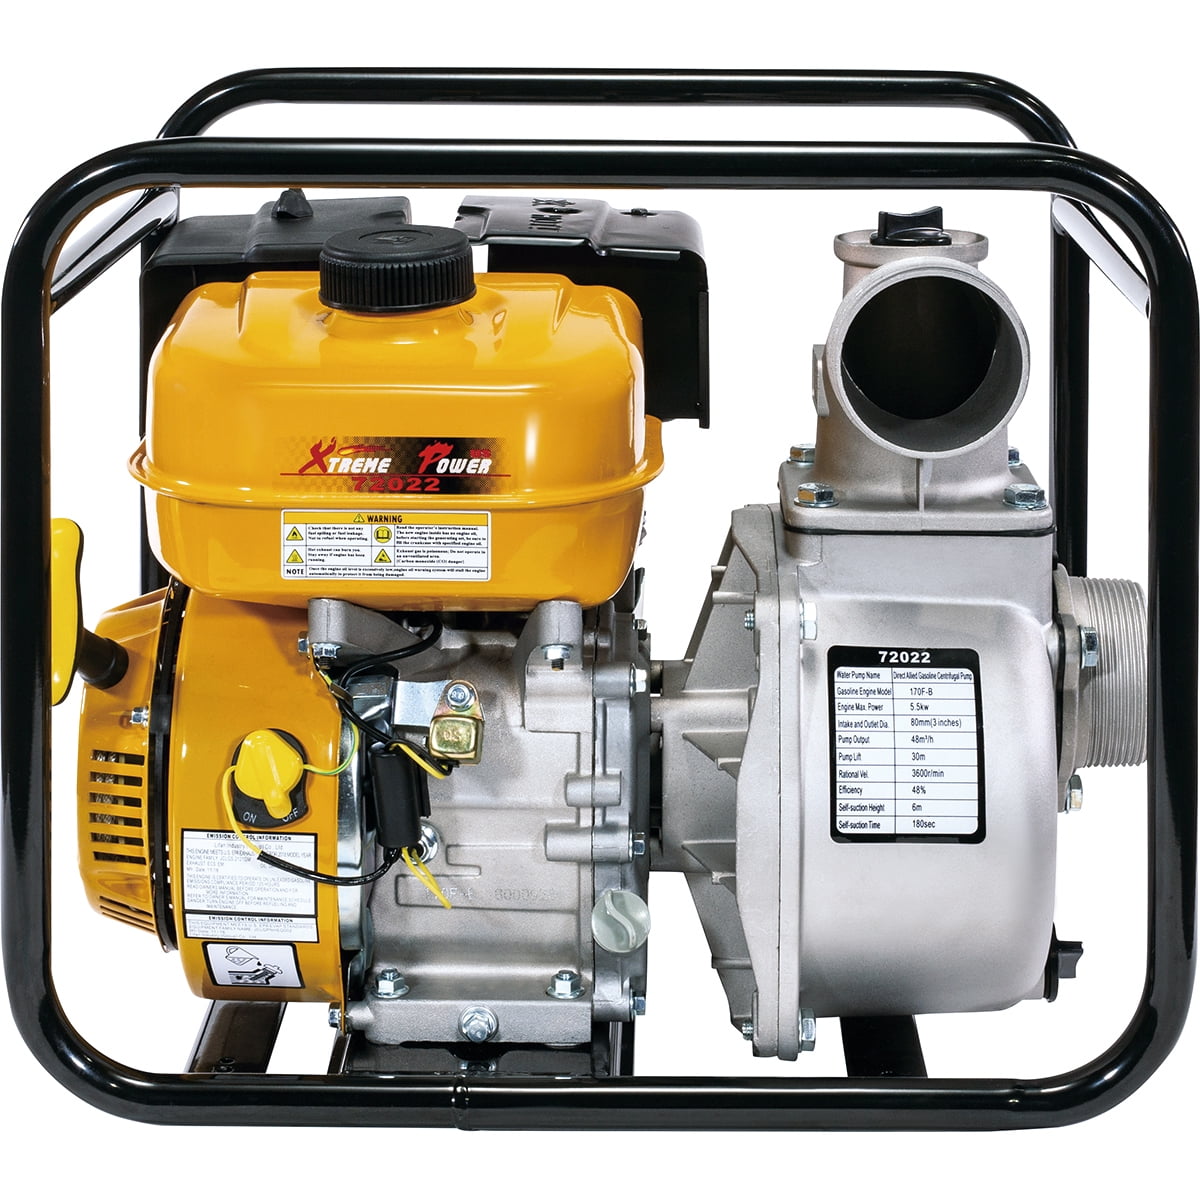 AlphaWorks Water Transfer Pump Portable 7HP 196cc 4-Stroke Gas Engine EPA Certified 2 Inch Intake 132GPM Flow Rate 23FT Suction 92FT Lift 1/2 Passable Solids 